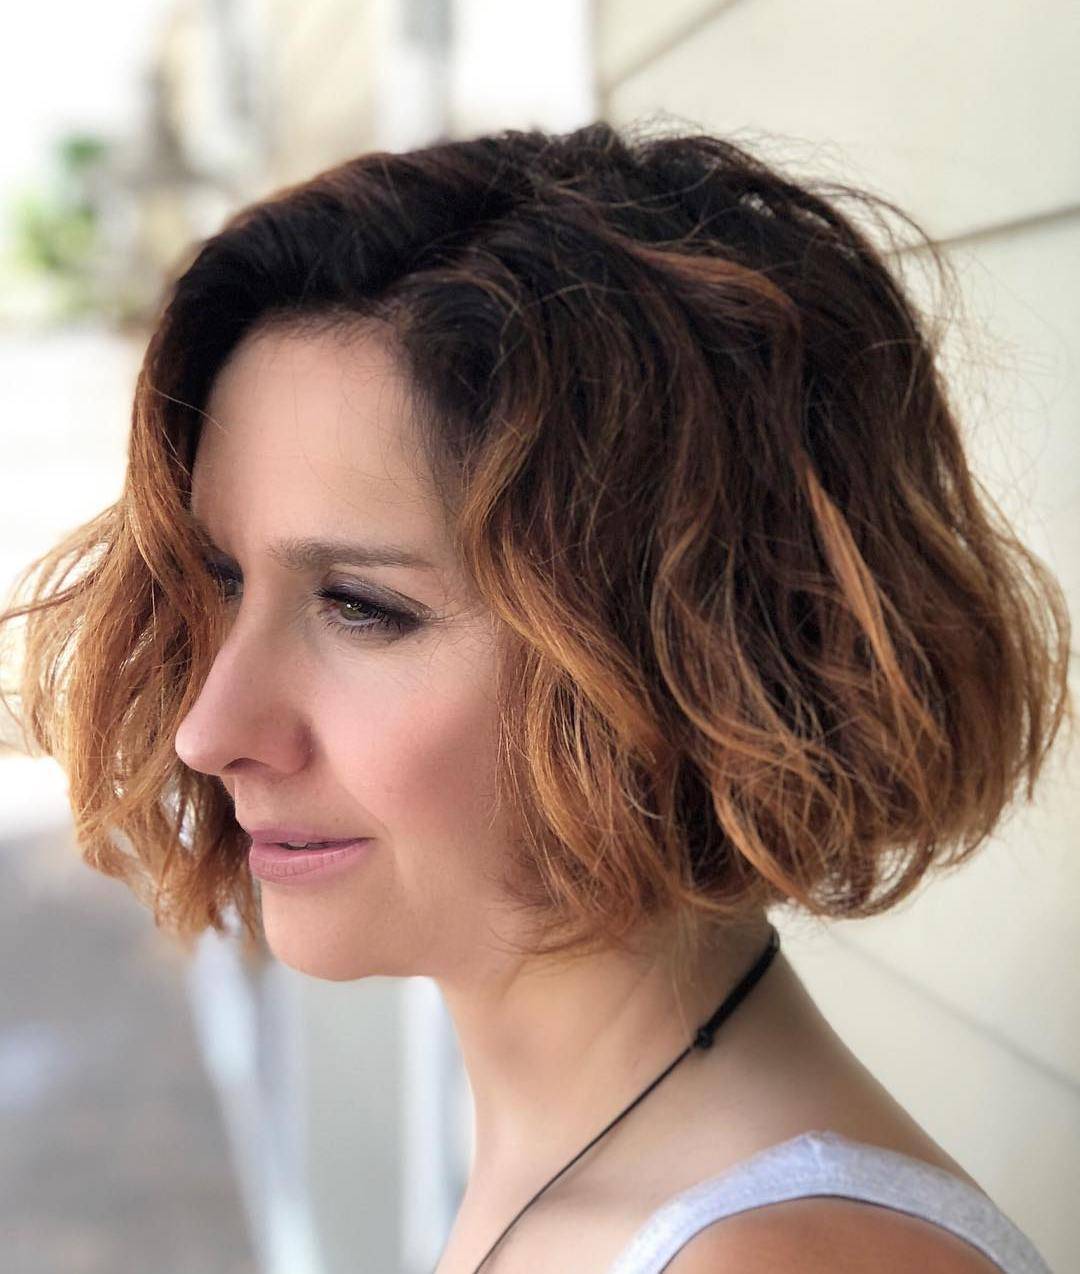 30 New Ways to Rock Short Curly Hair in 2020 Inspired by Instagram